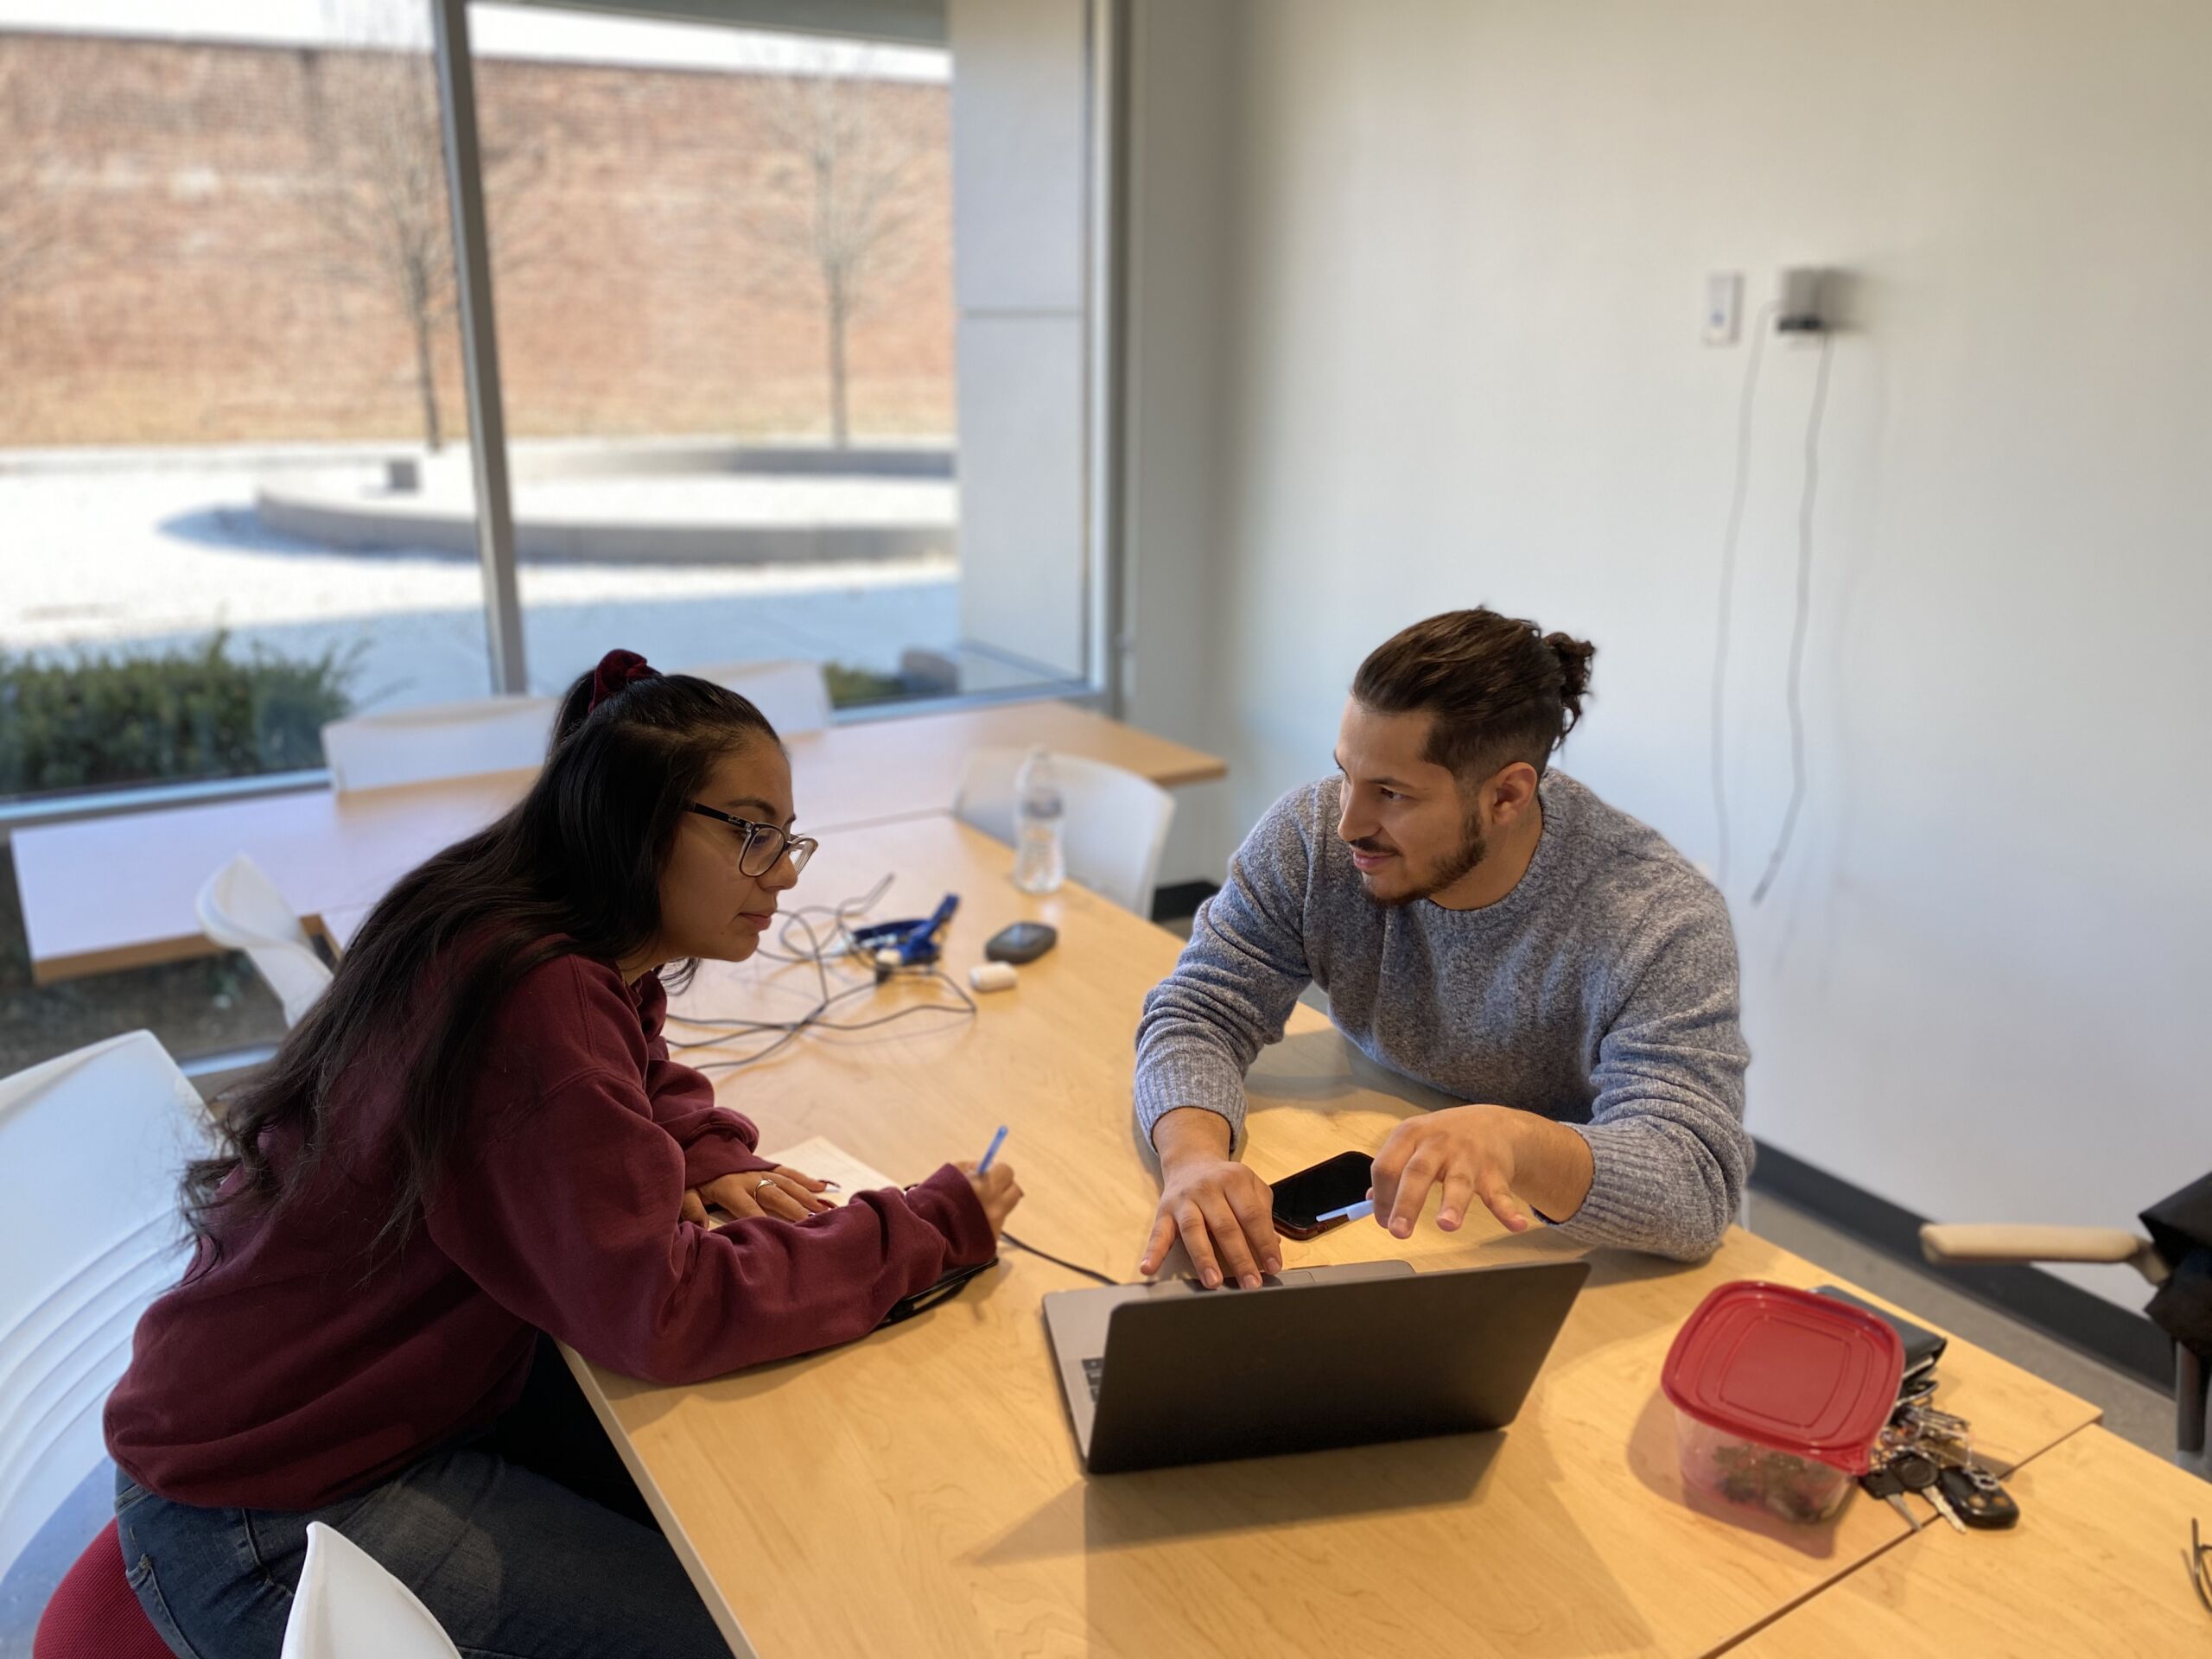 In this photo, you can see Isaiah Martinez sitting at a table with a young Noble Schools' alum, walking her through something on a laptop. He is looking at her as he points at something on the laptop. She has her head leaned forward as she looks at the laptop and takes notes with pen and paper.